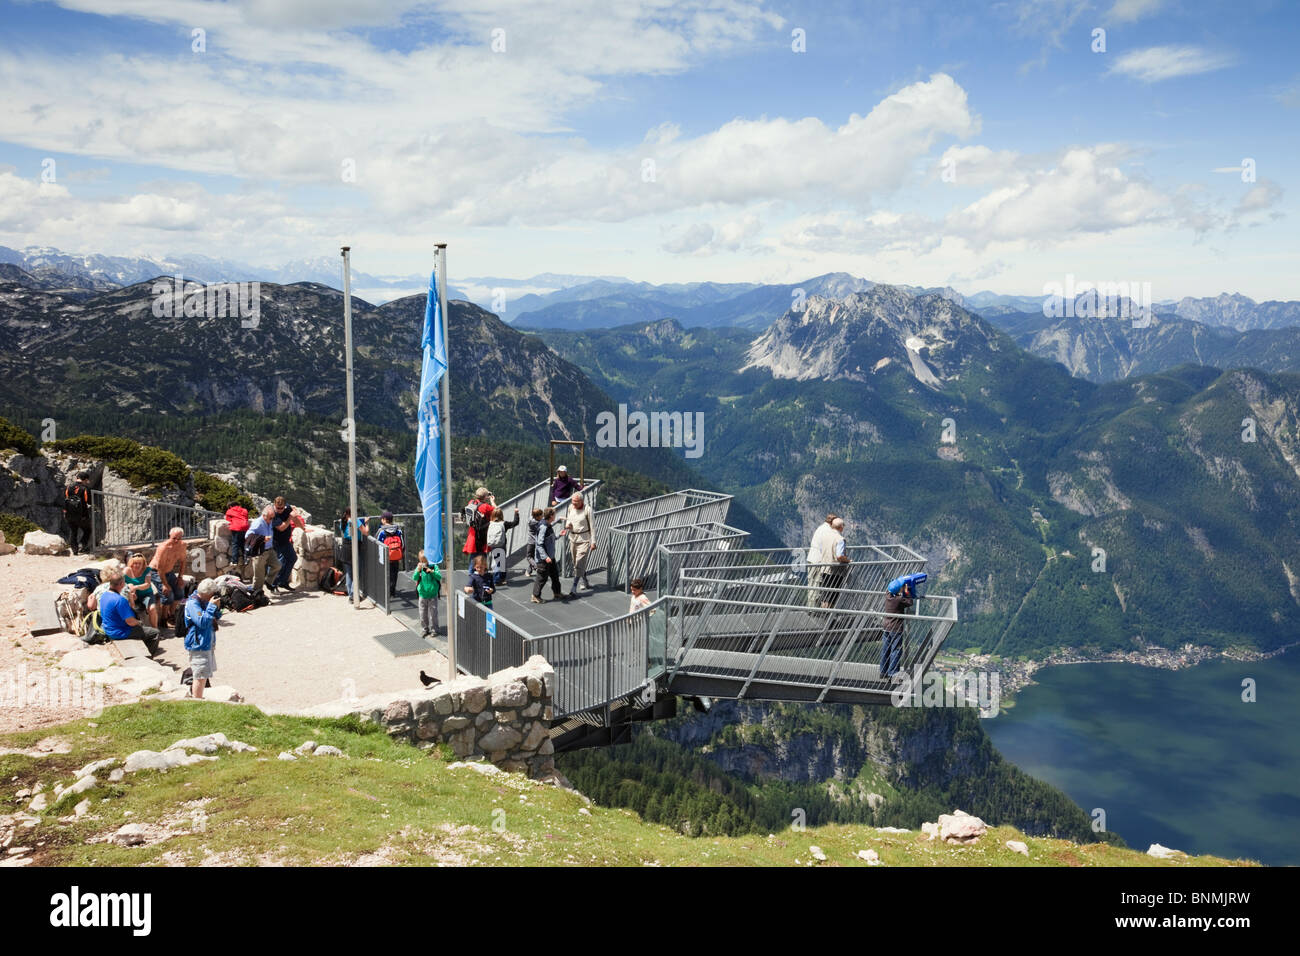 People on 5fingers viewing platform on Krippenstein mountain at Dachstein World Heritage site above Hallstattersee lake in Alps. Stock Photo